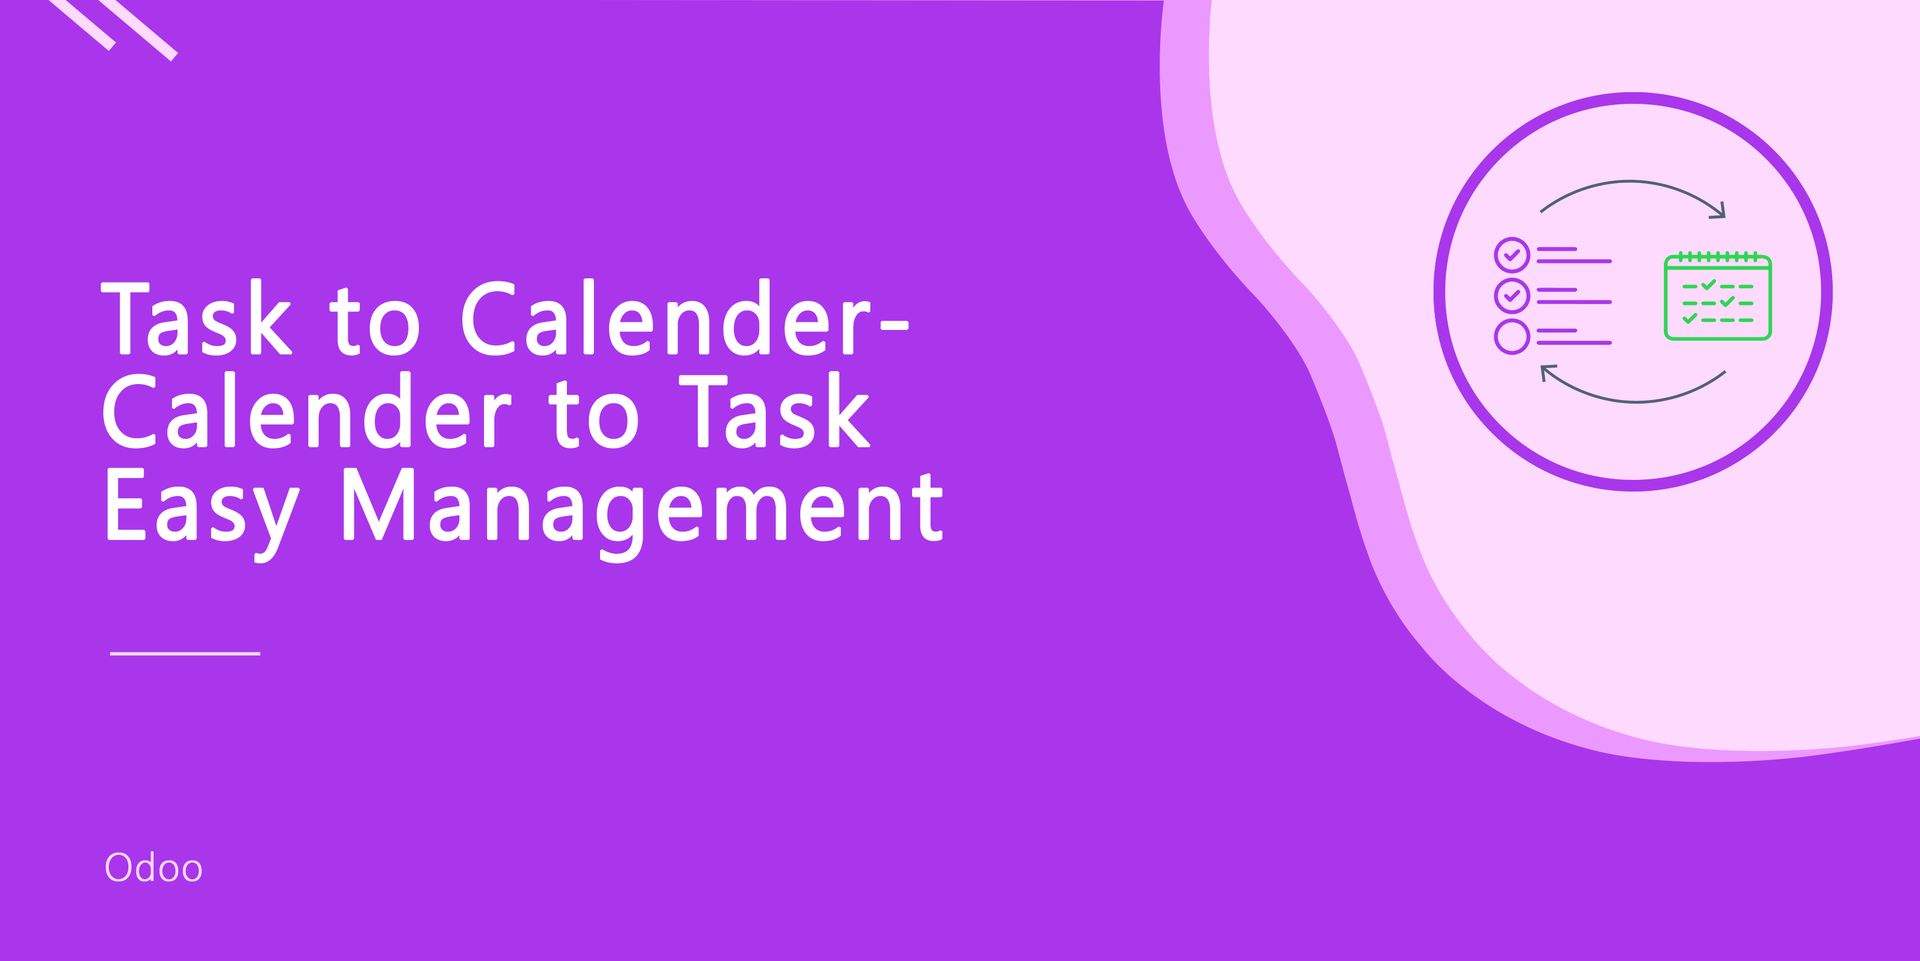 Project Task to Calendar and Calendar to Task Easy Management
